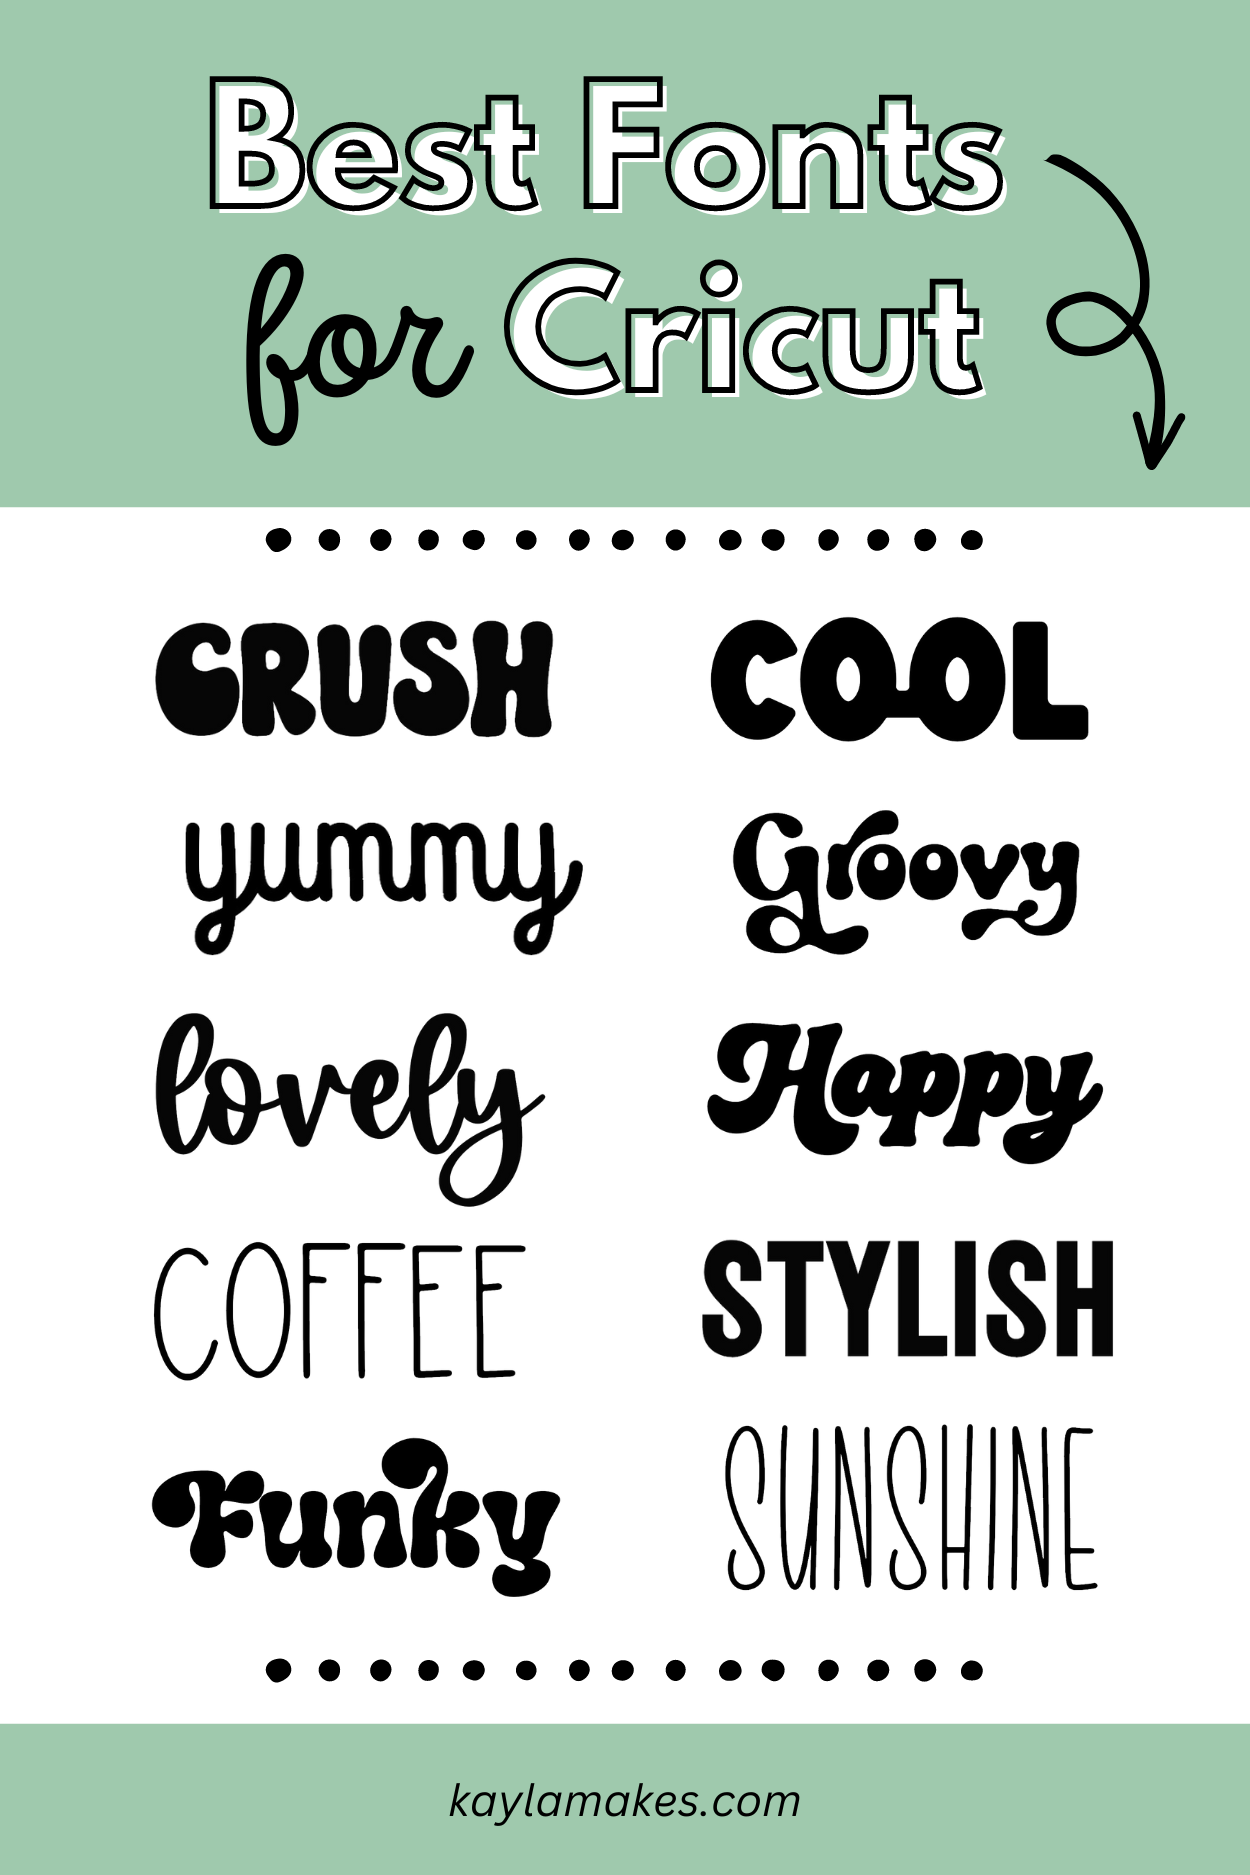 The 10 Best Fonts For Cricut A Design Guide Kayla Makes